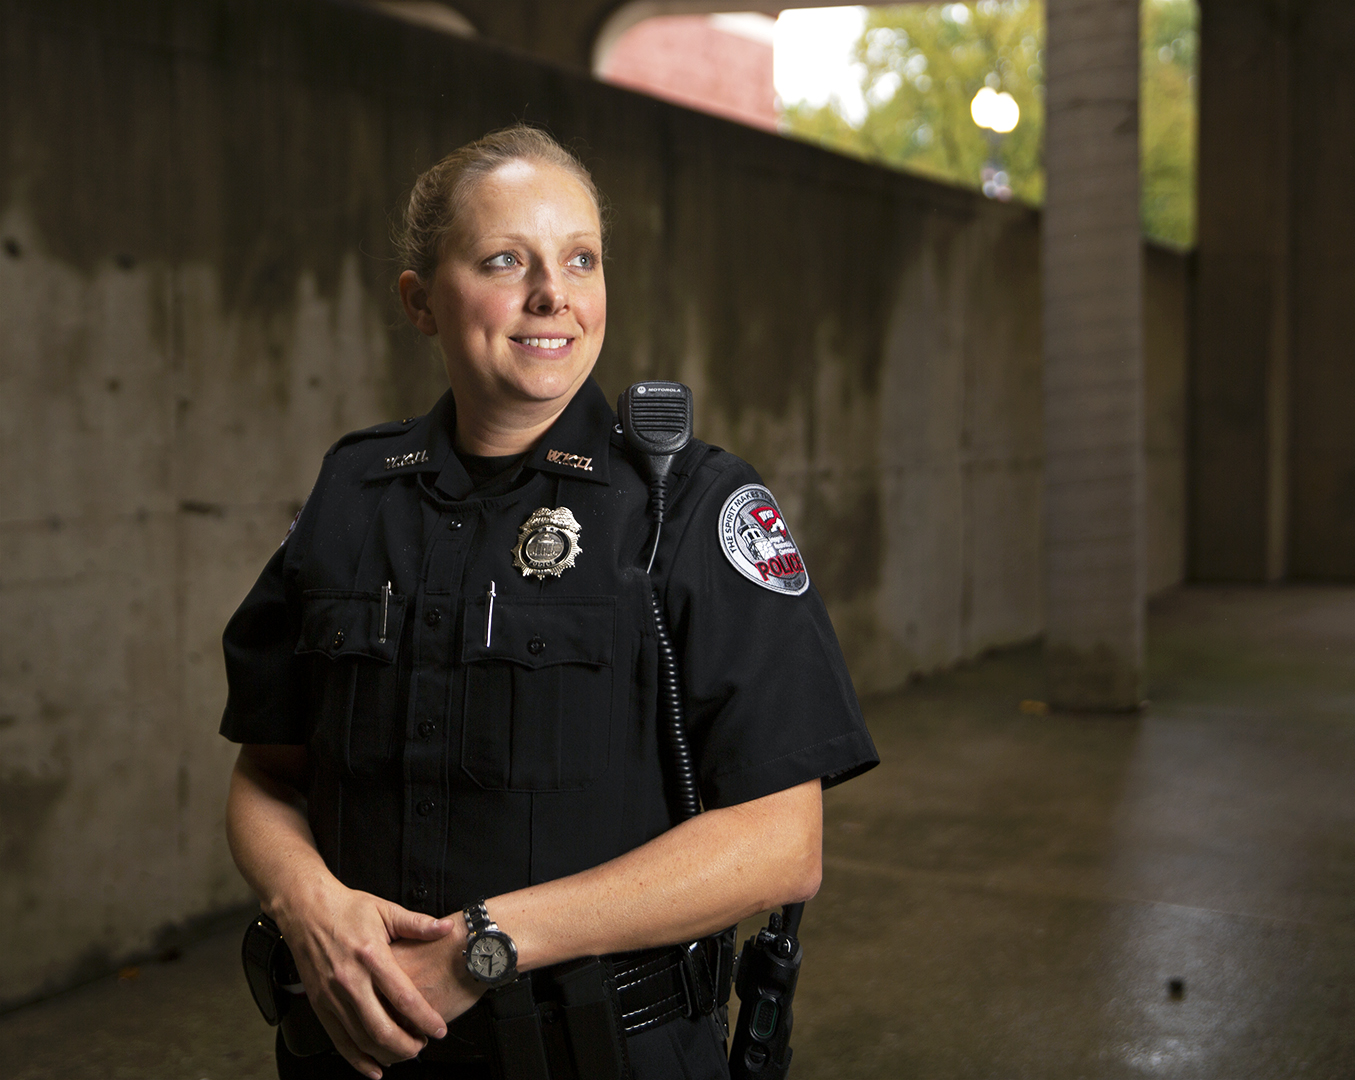 Melissa Bailey was hired by WKU Police in October of 2018 and her first day in uniform was Oct. 15.